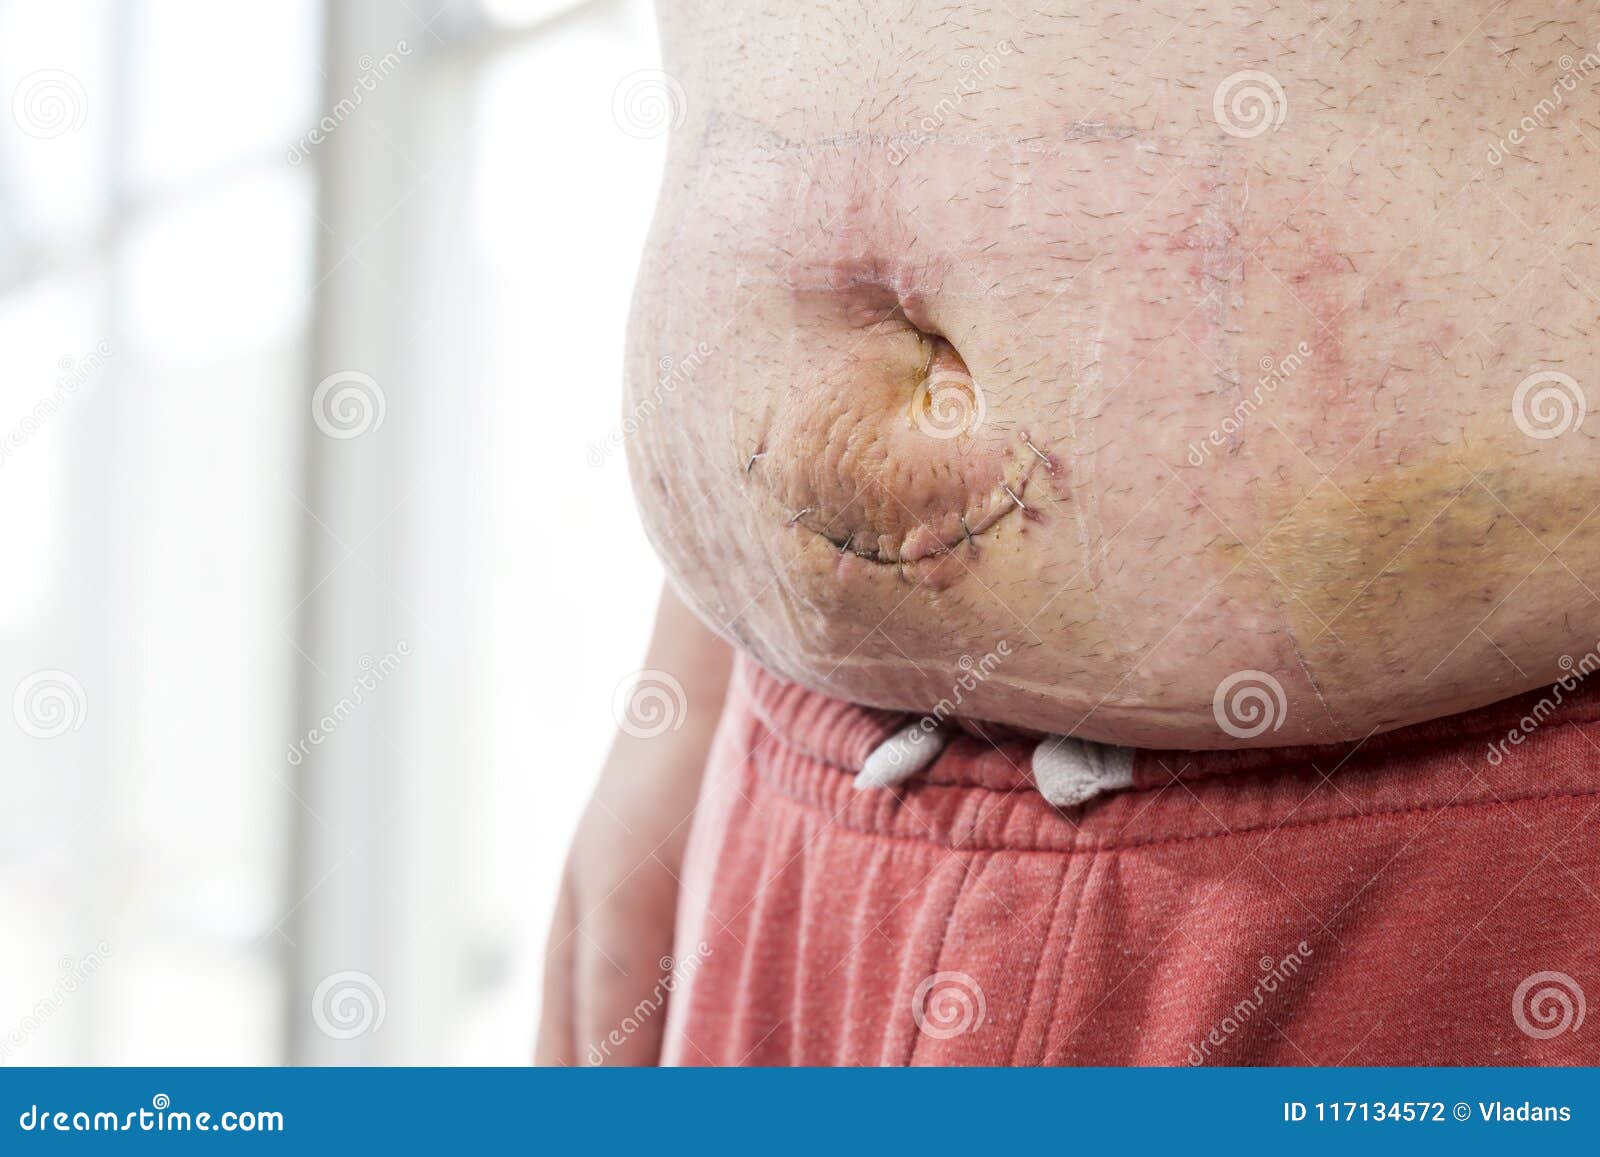 Umbilical Hernia Incision Stock Photo Image Of Painful 117134572